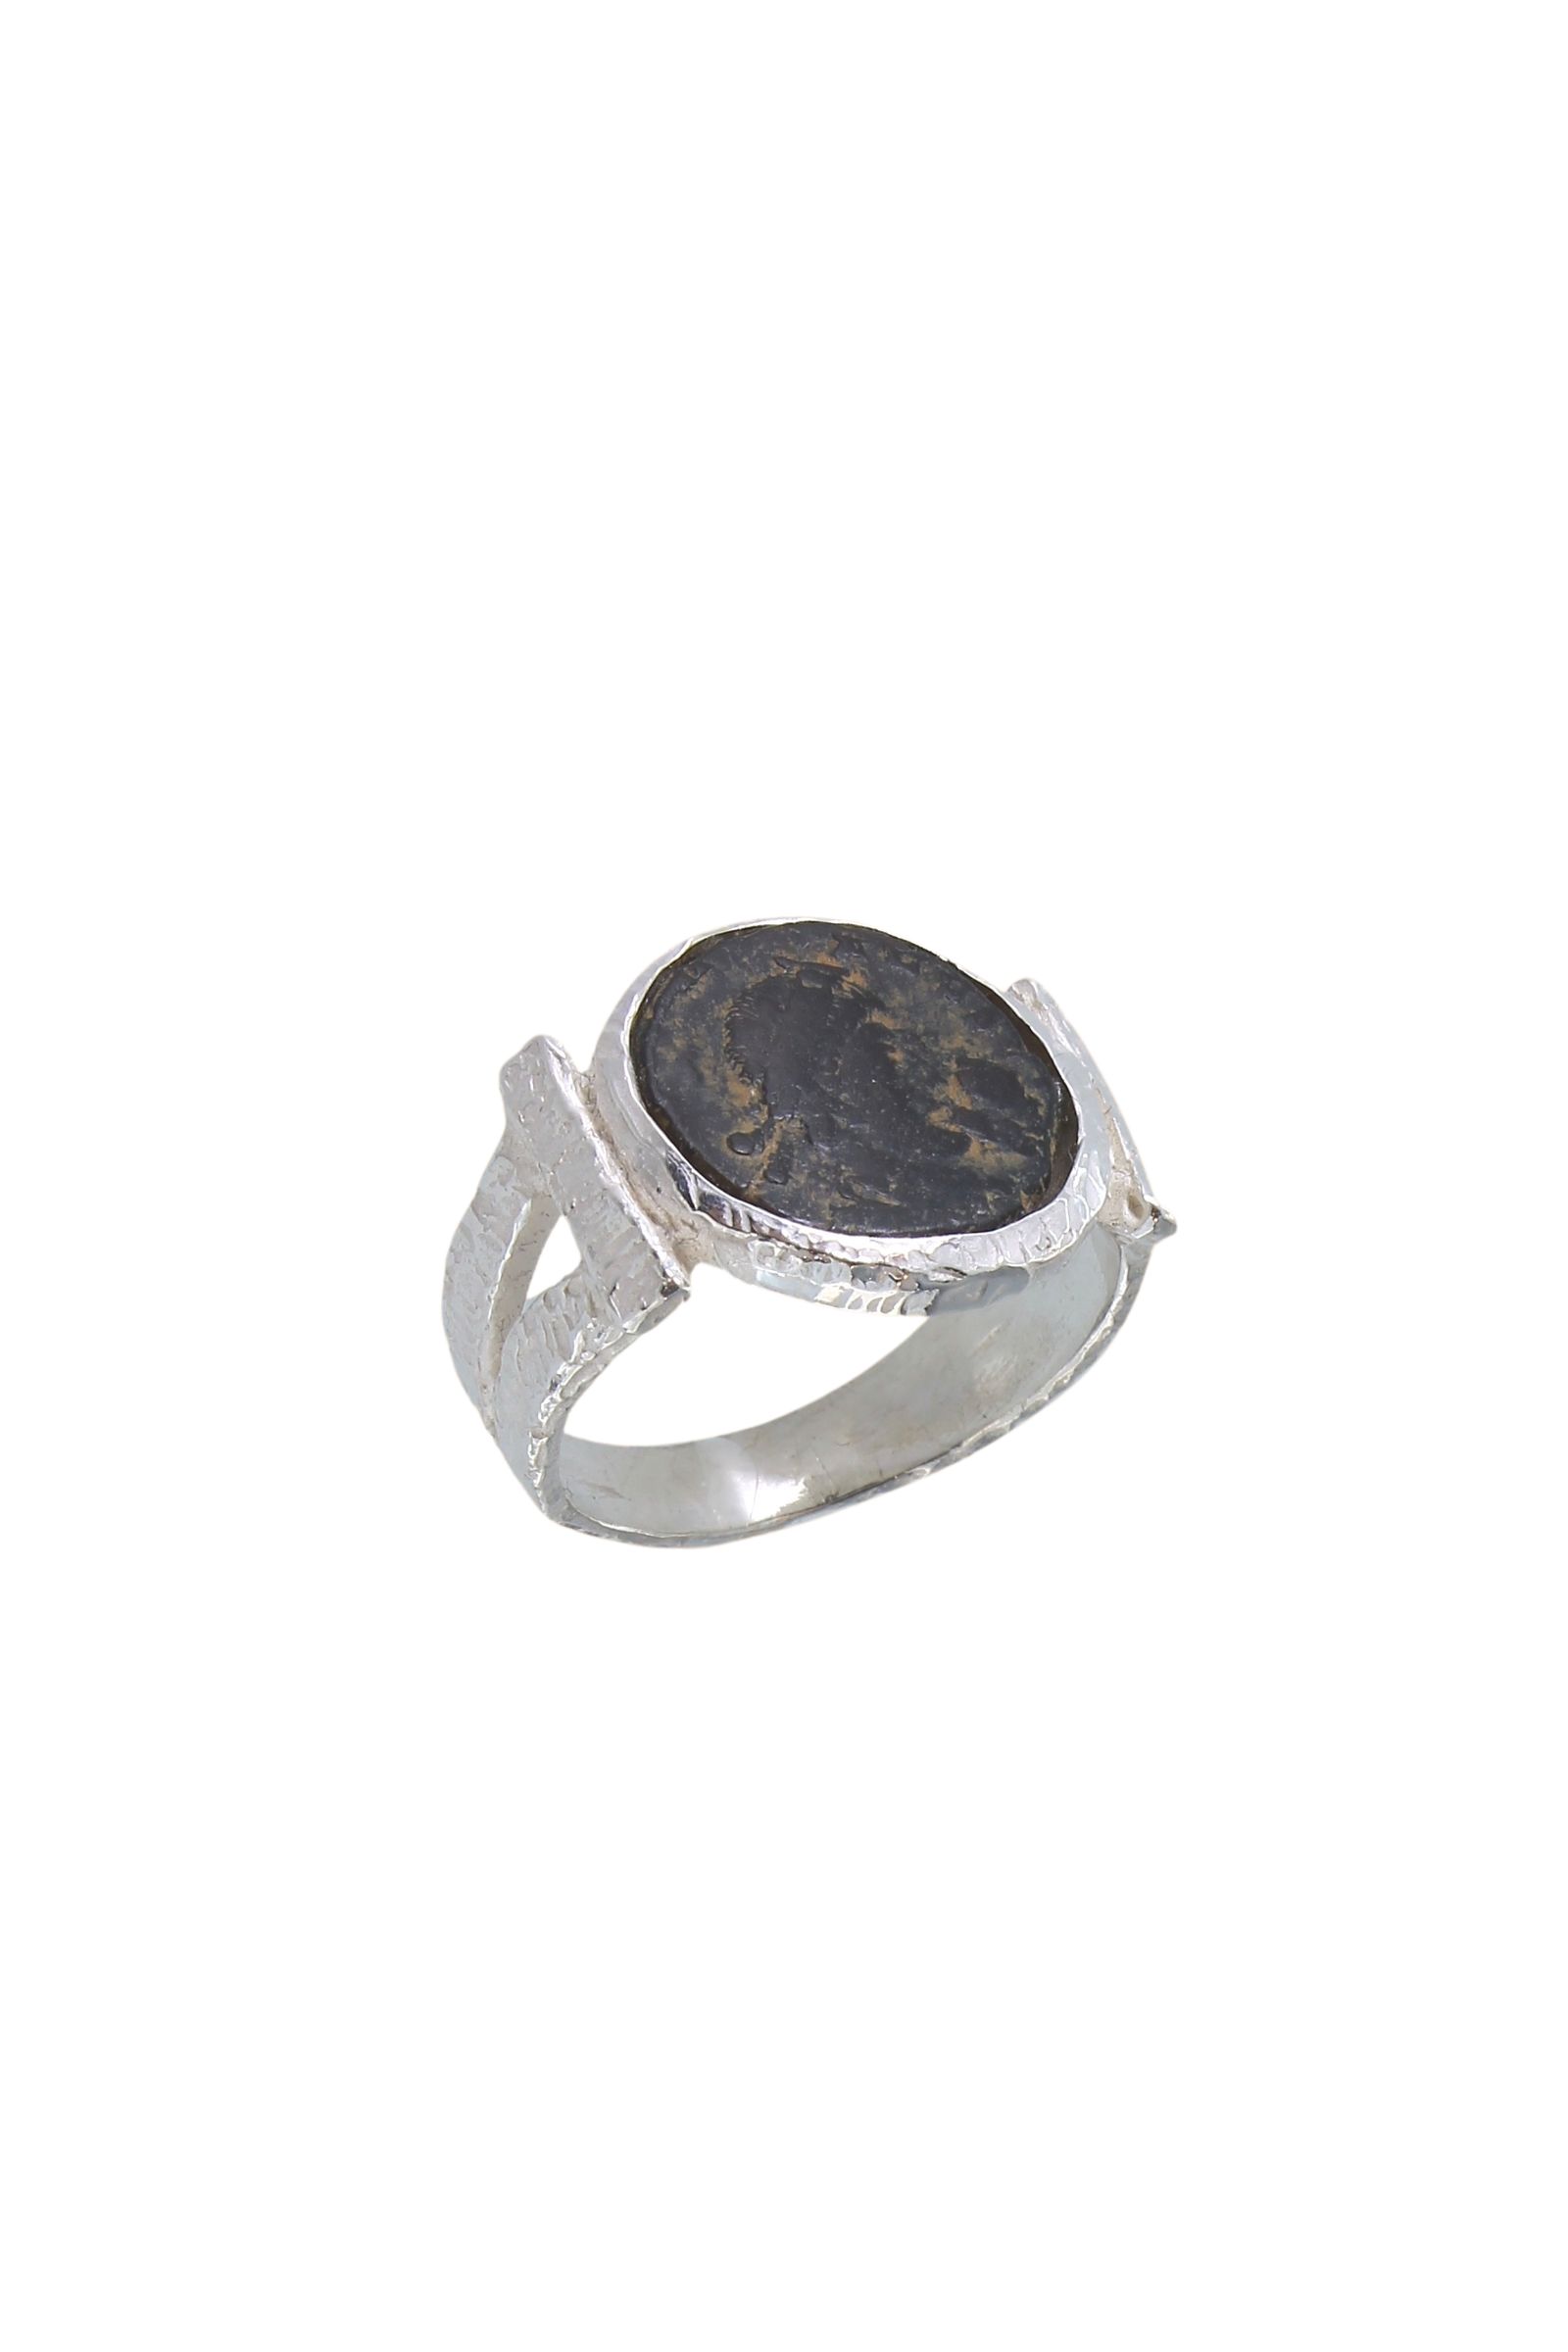 AE679-Sterling-Silver-925-Roman-Coin-Ring-1_